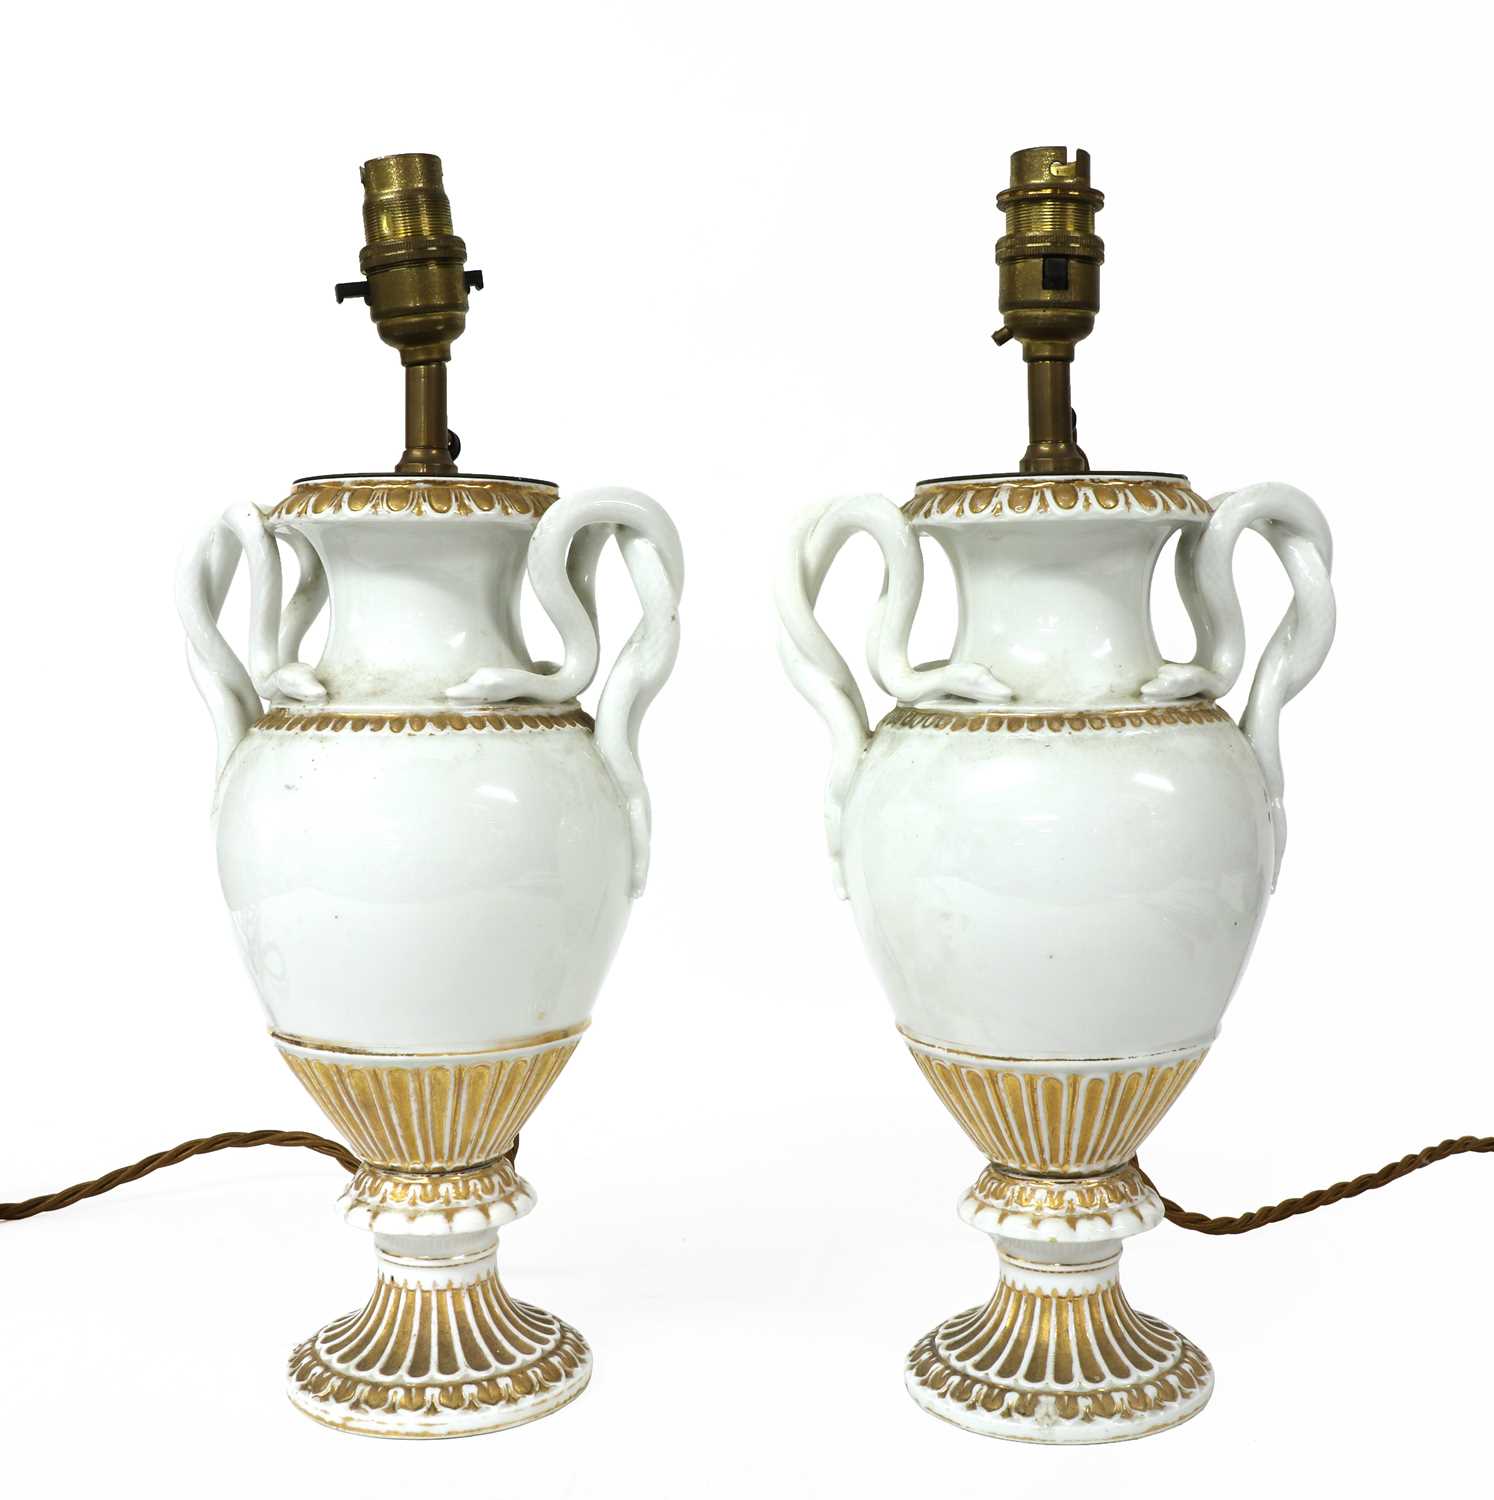 Lot 101 - A pair of Meissen style vases